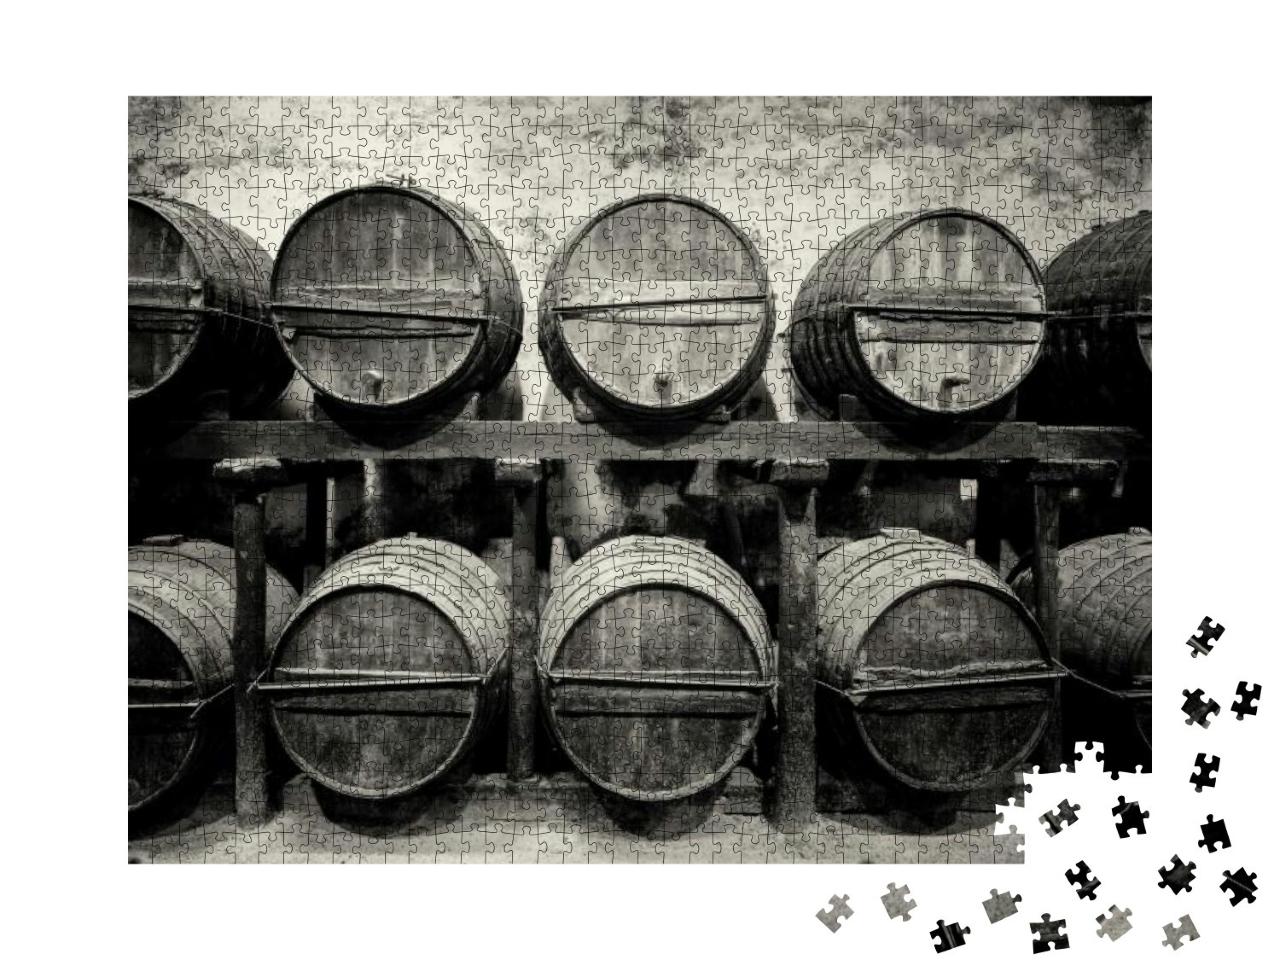 Barrels Stacked in the Winery in Black & White... Jigsaw Puzzle with 1000 pieces